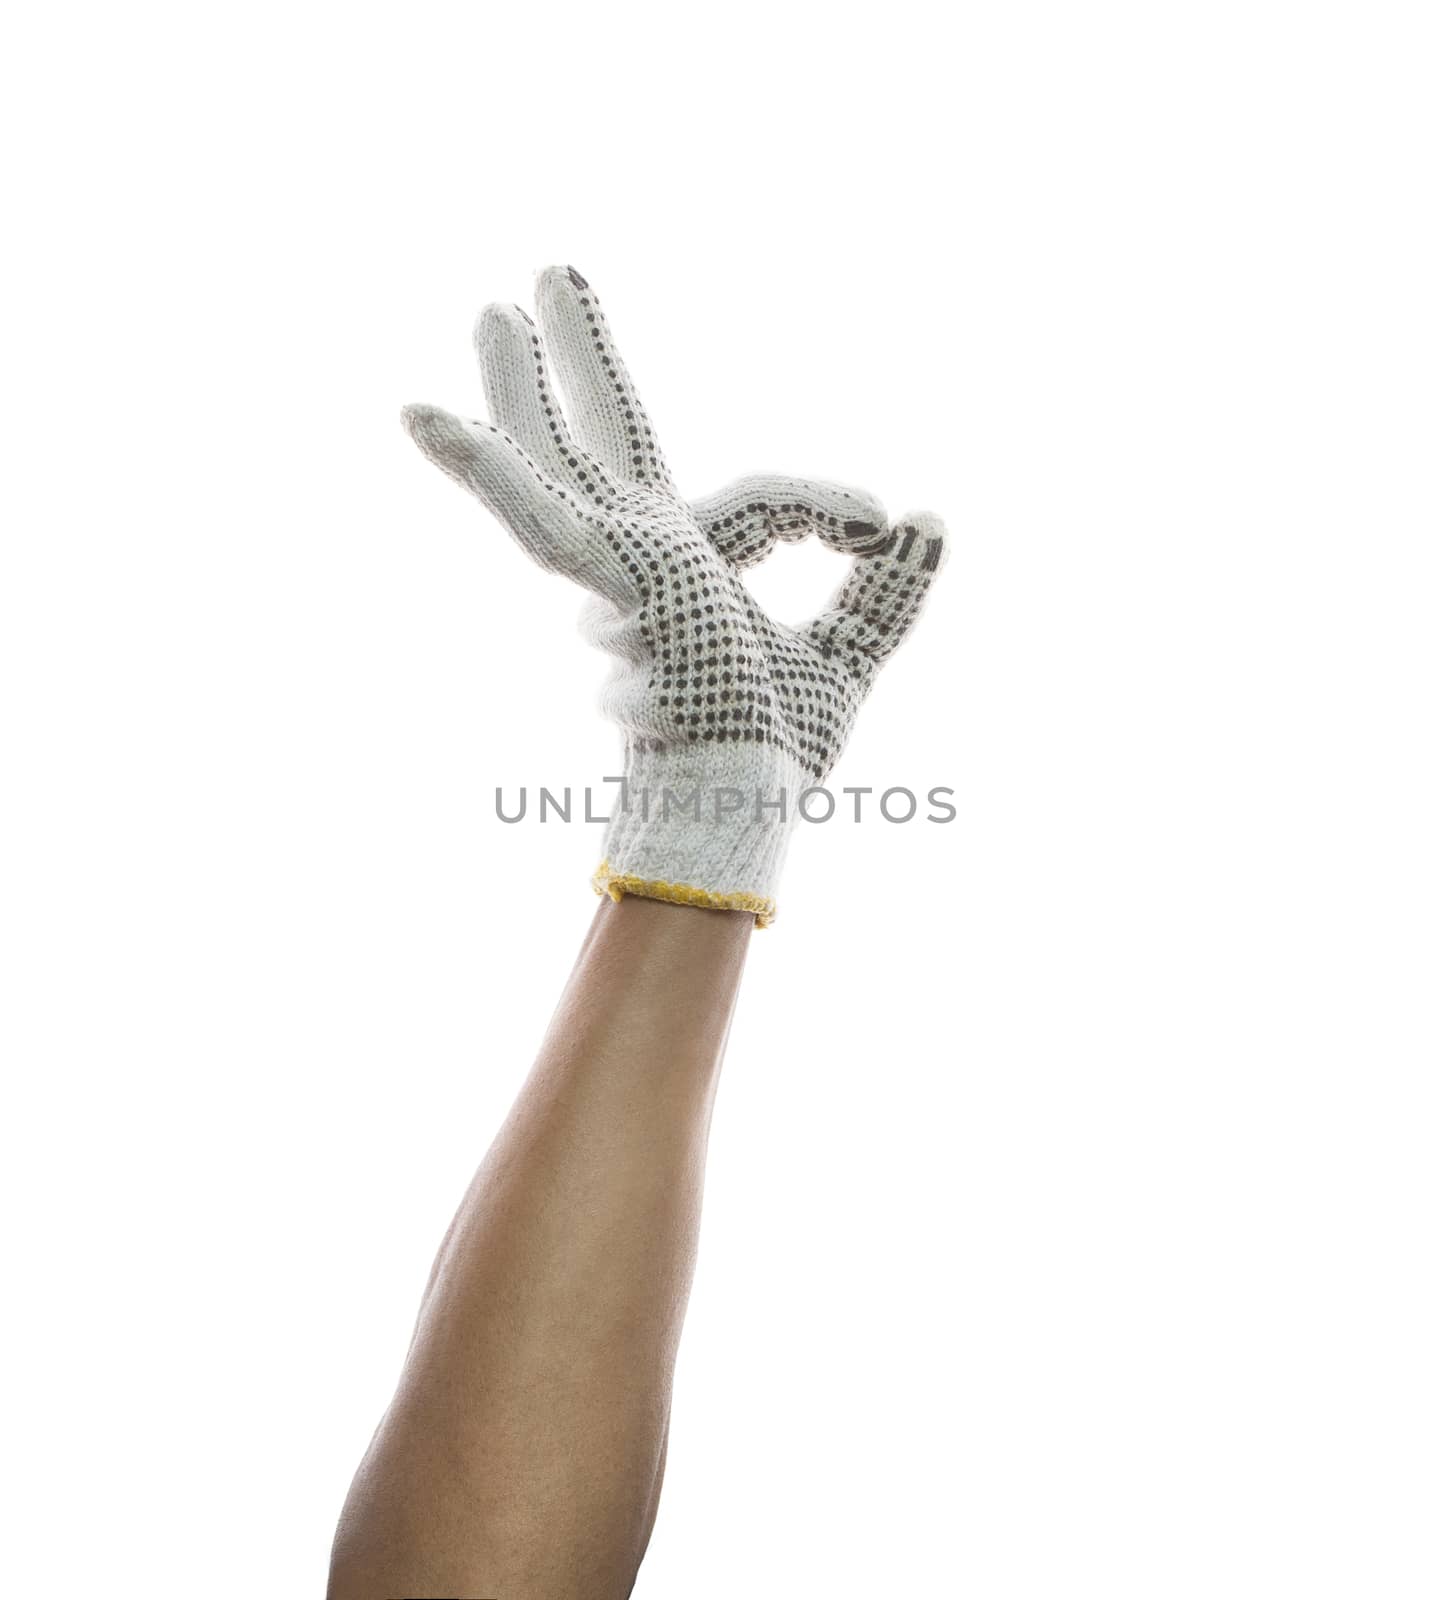 male hand wearing clothes hand glove sign o.k. use for construct by khunaspix